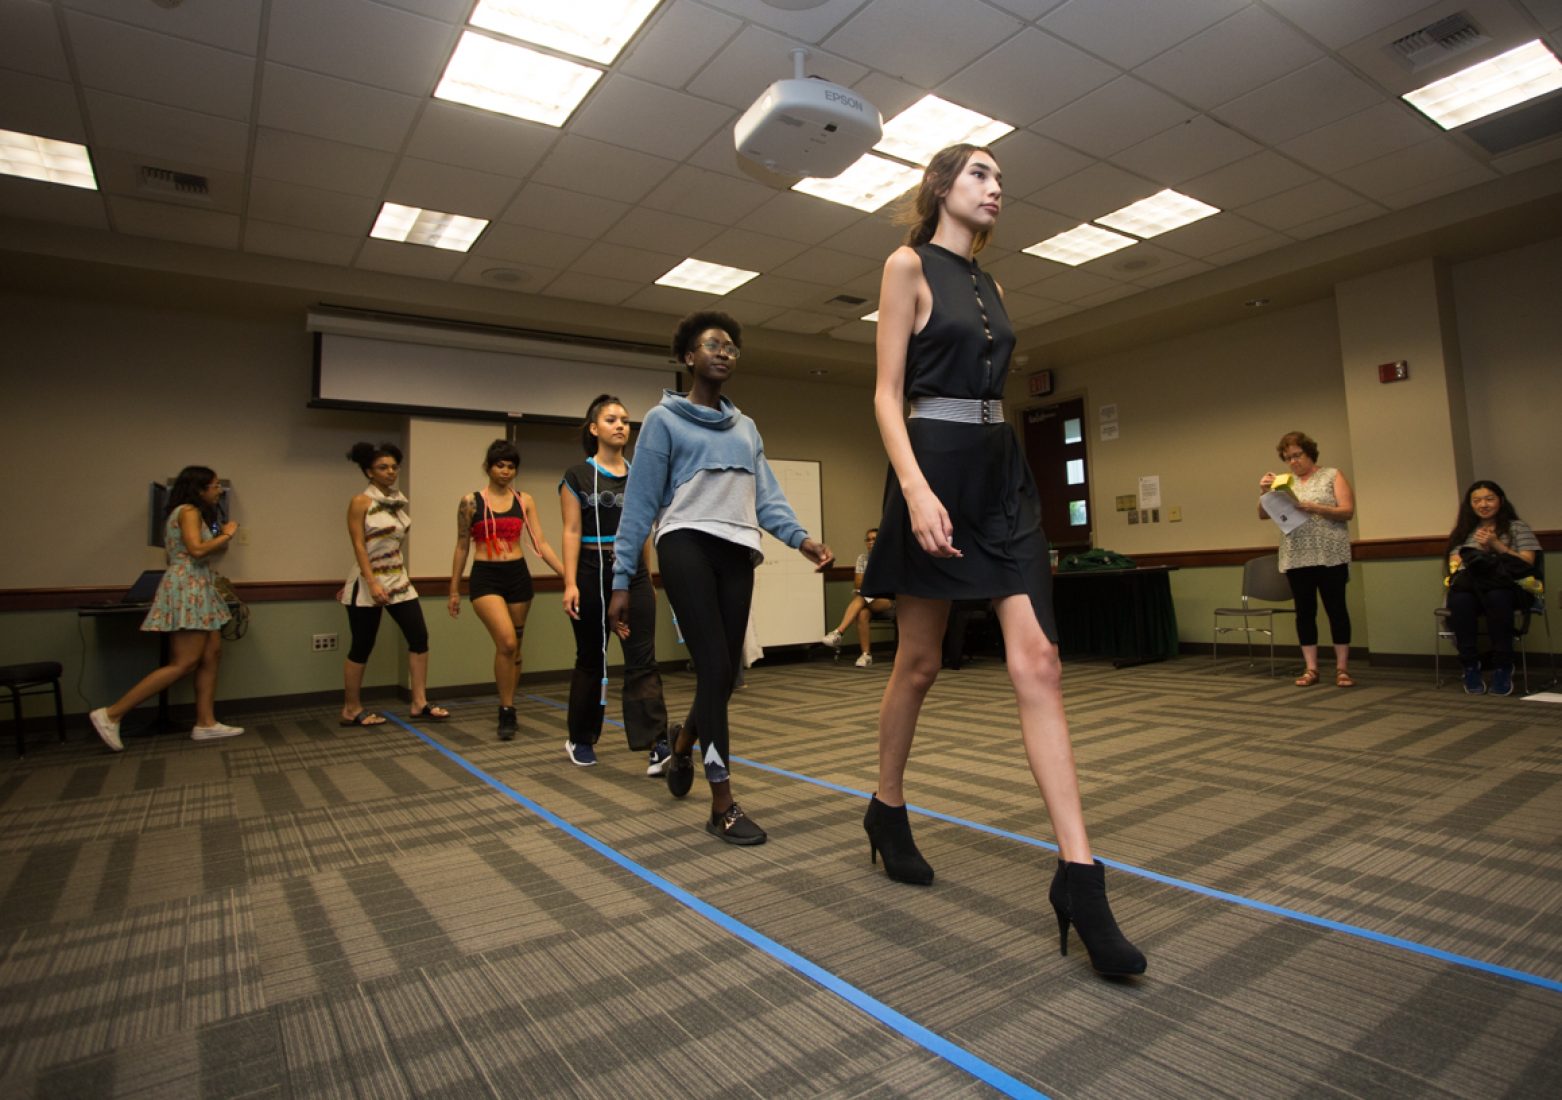 Models practice their runway walks during rehearsal in the University Union Foothill Suite on Wednesday. (Photo by Nicole Fowler)